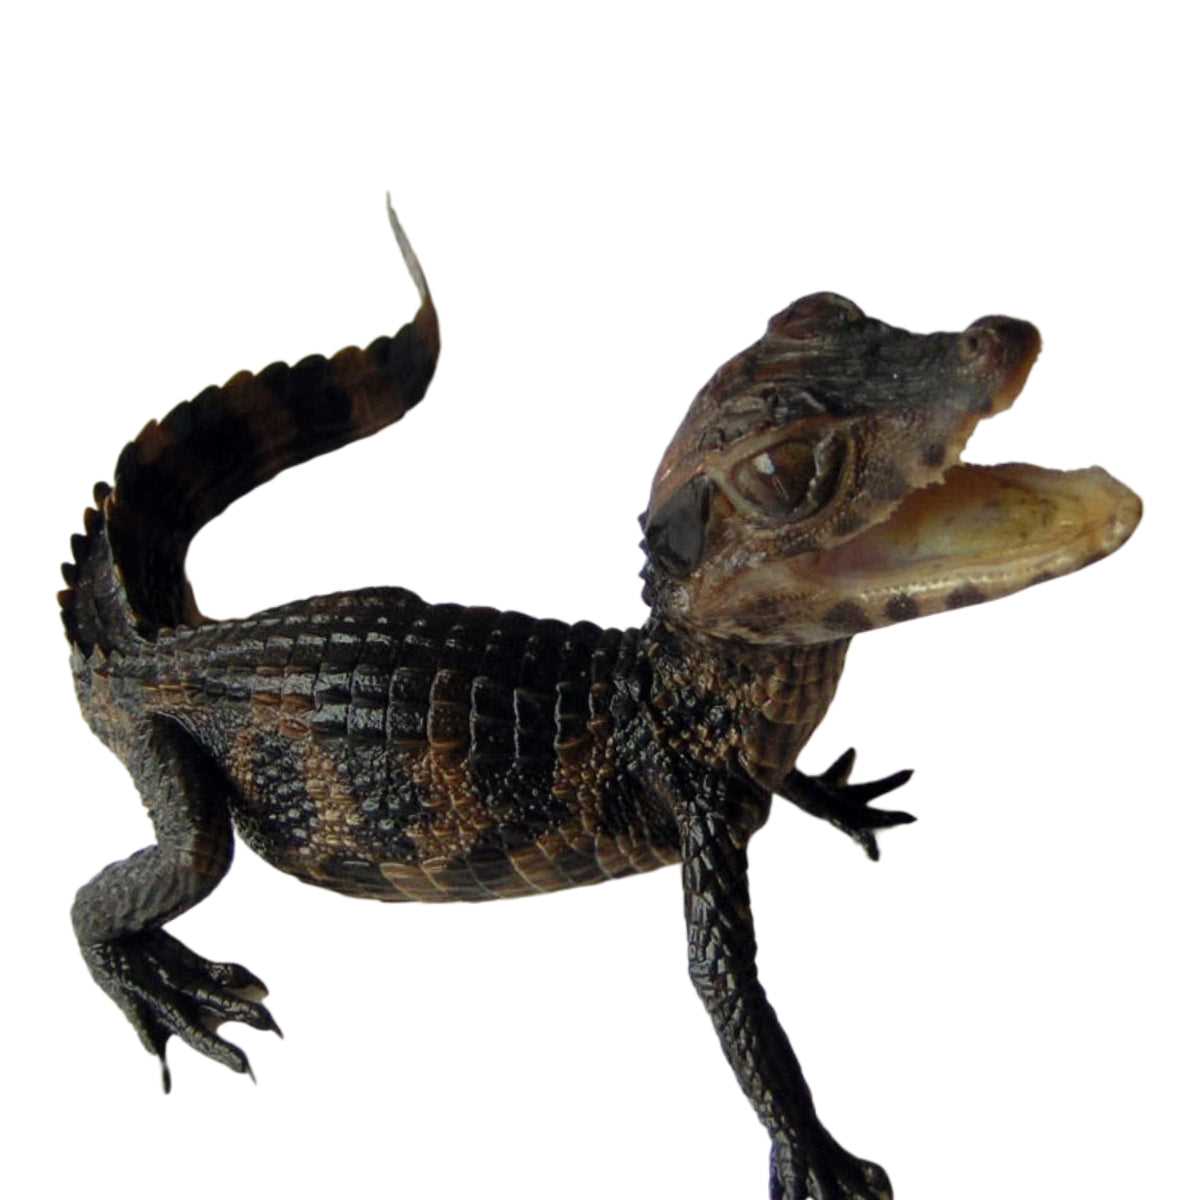 Why the Dwarf Caiman Makes a Great Pet